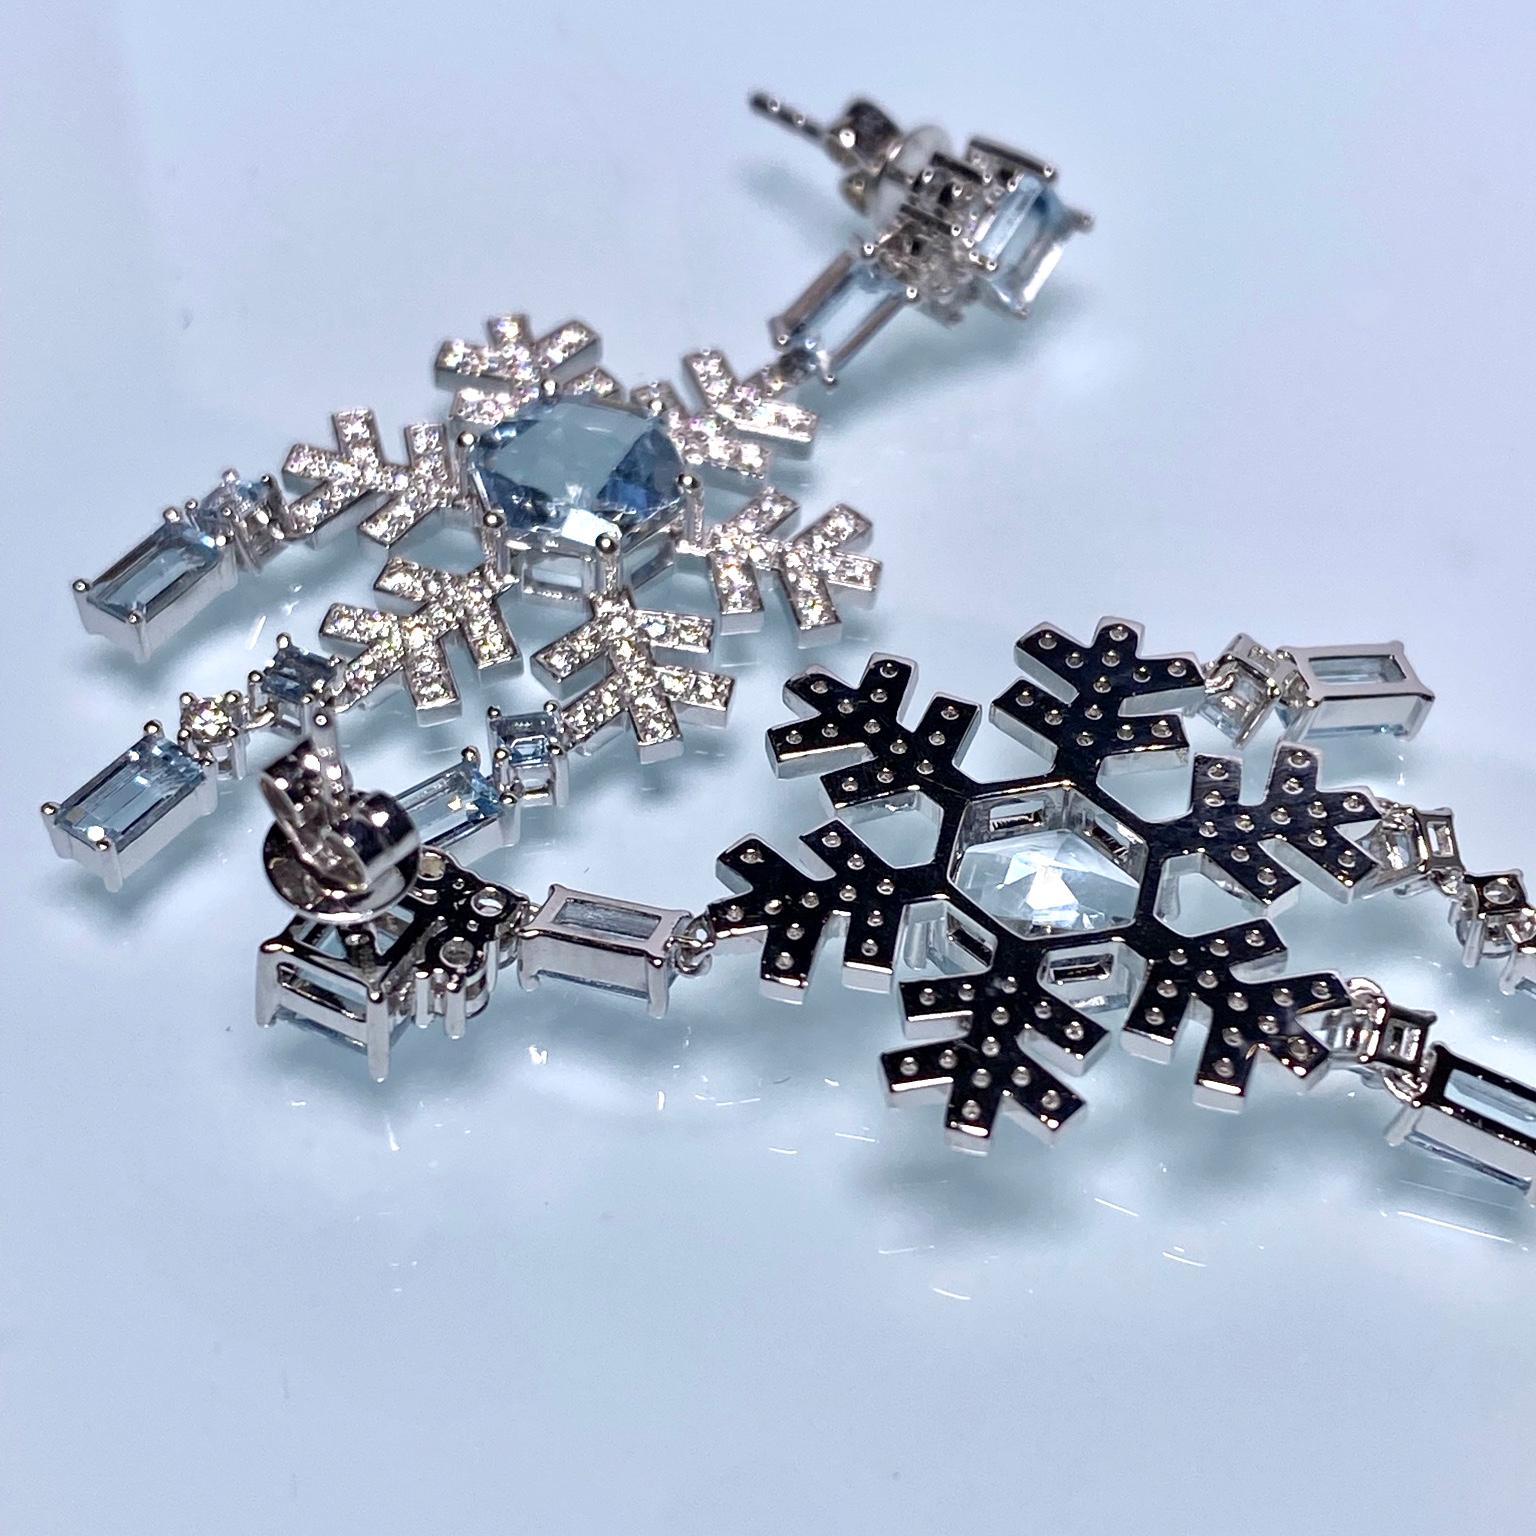 This is a pair of snowflake design Chandelier Earring. The Snowflake is suspended below an Aquamarine and diamond motif. At the center of the snowflake, there is a hexagonal Aquamarine. It is a very contemporary design as will be more popular among